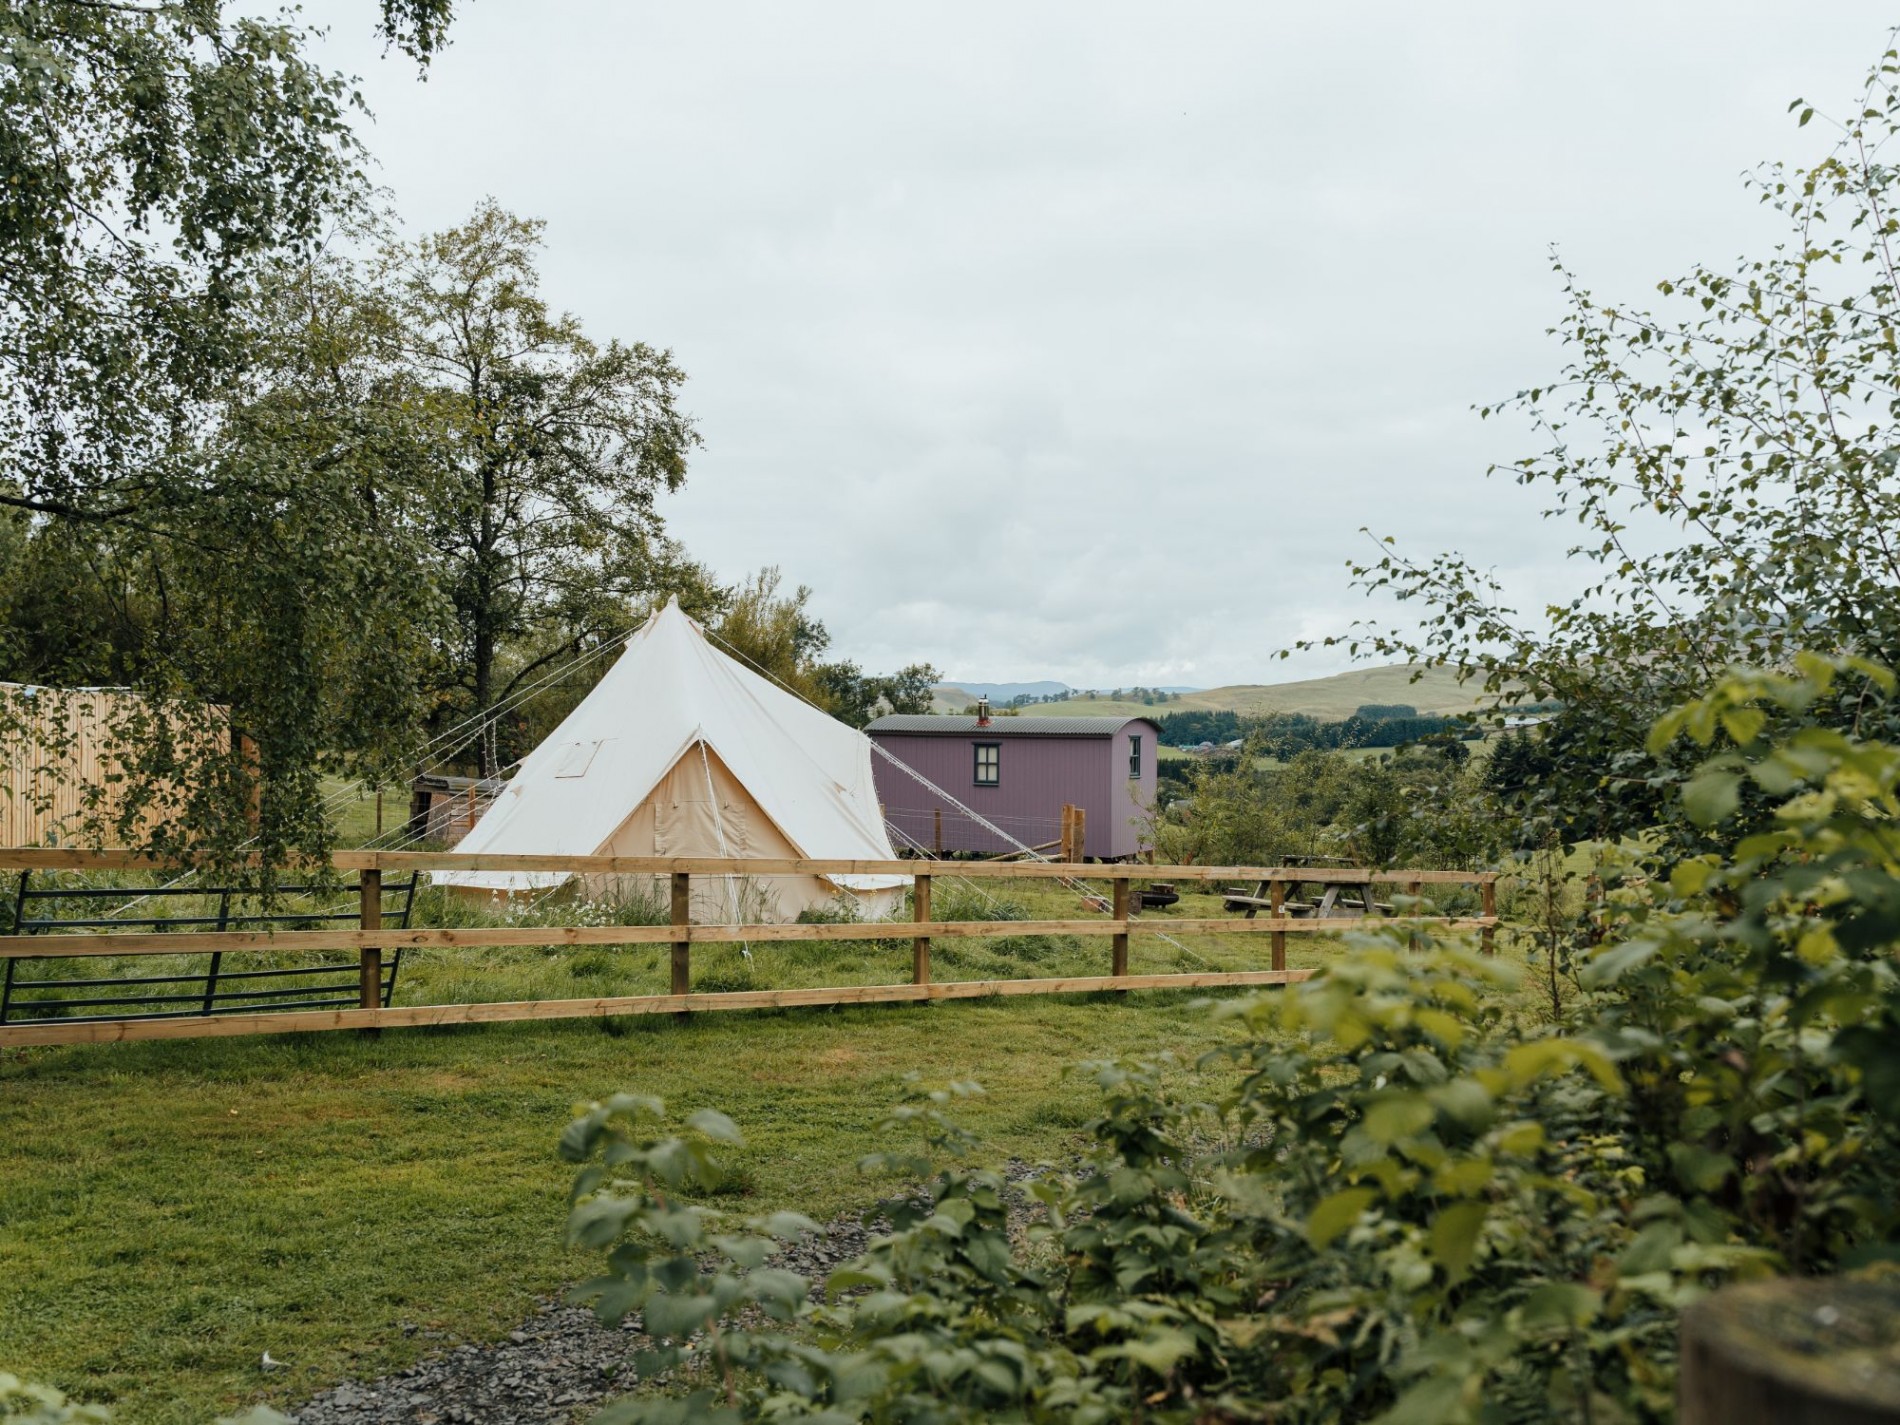 The Canvas Bell Tent and Lilac Tummelberry Hut in amongst the rich green trees and grass of the glamping paddock looking over the surround hills. A rustic wooden fence sections off The Bell Tent's own area.